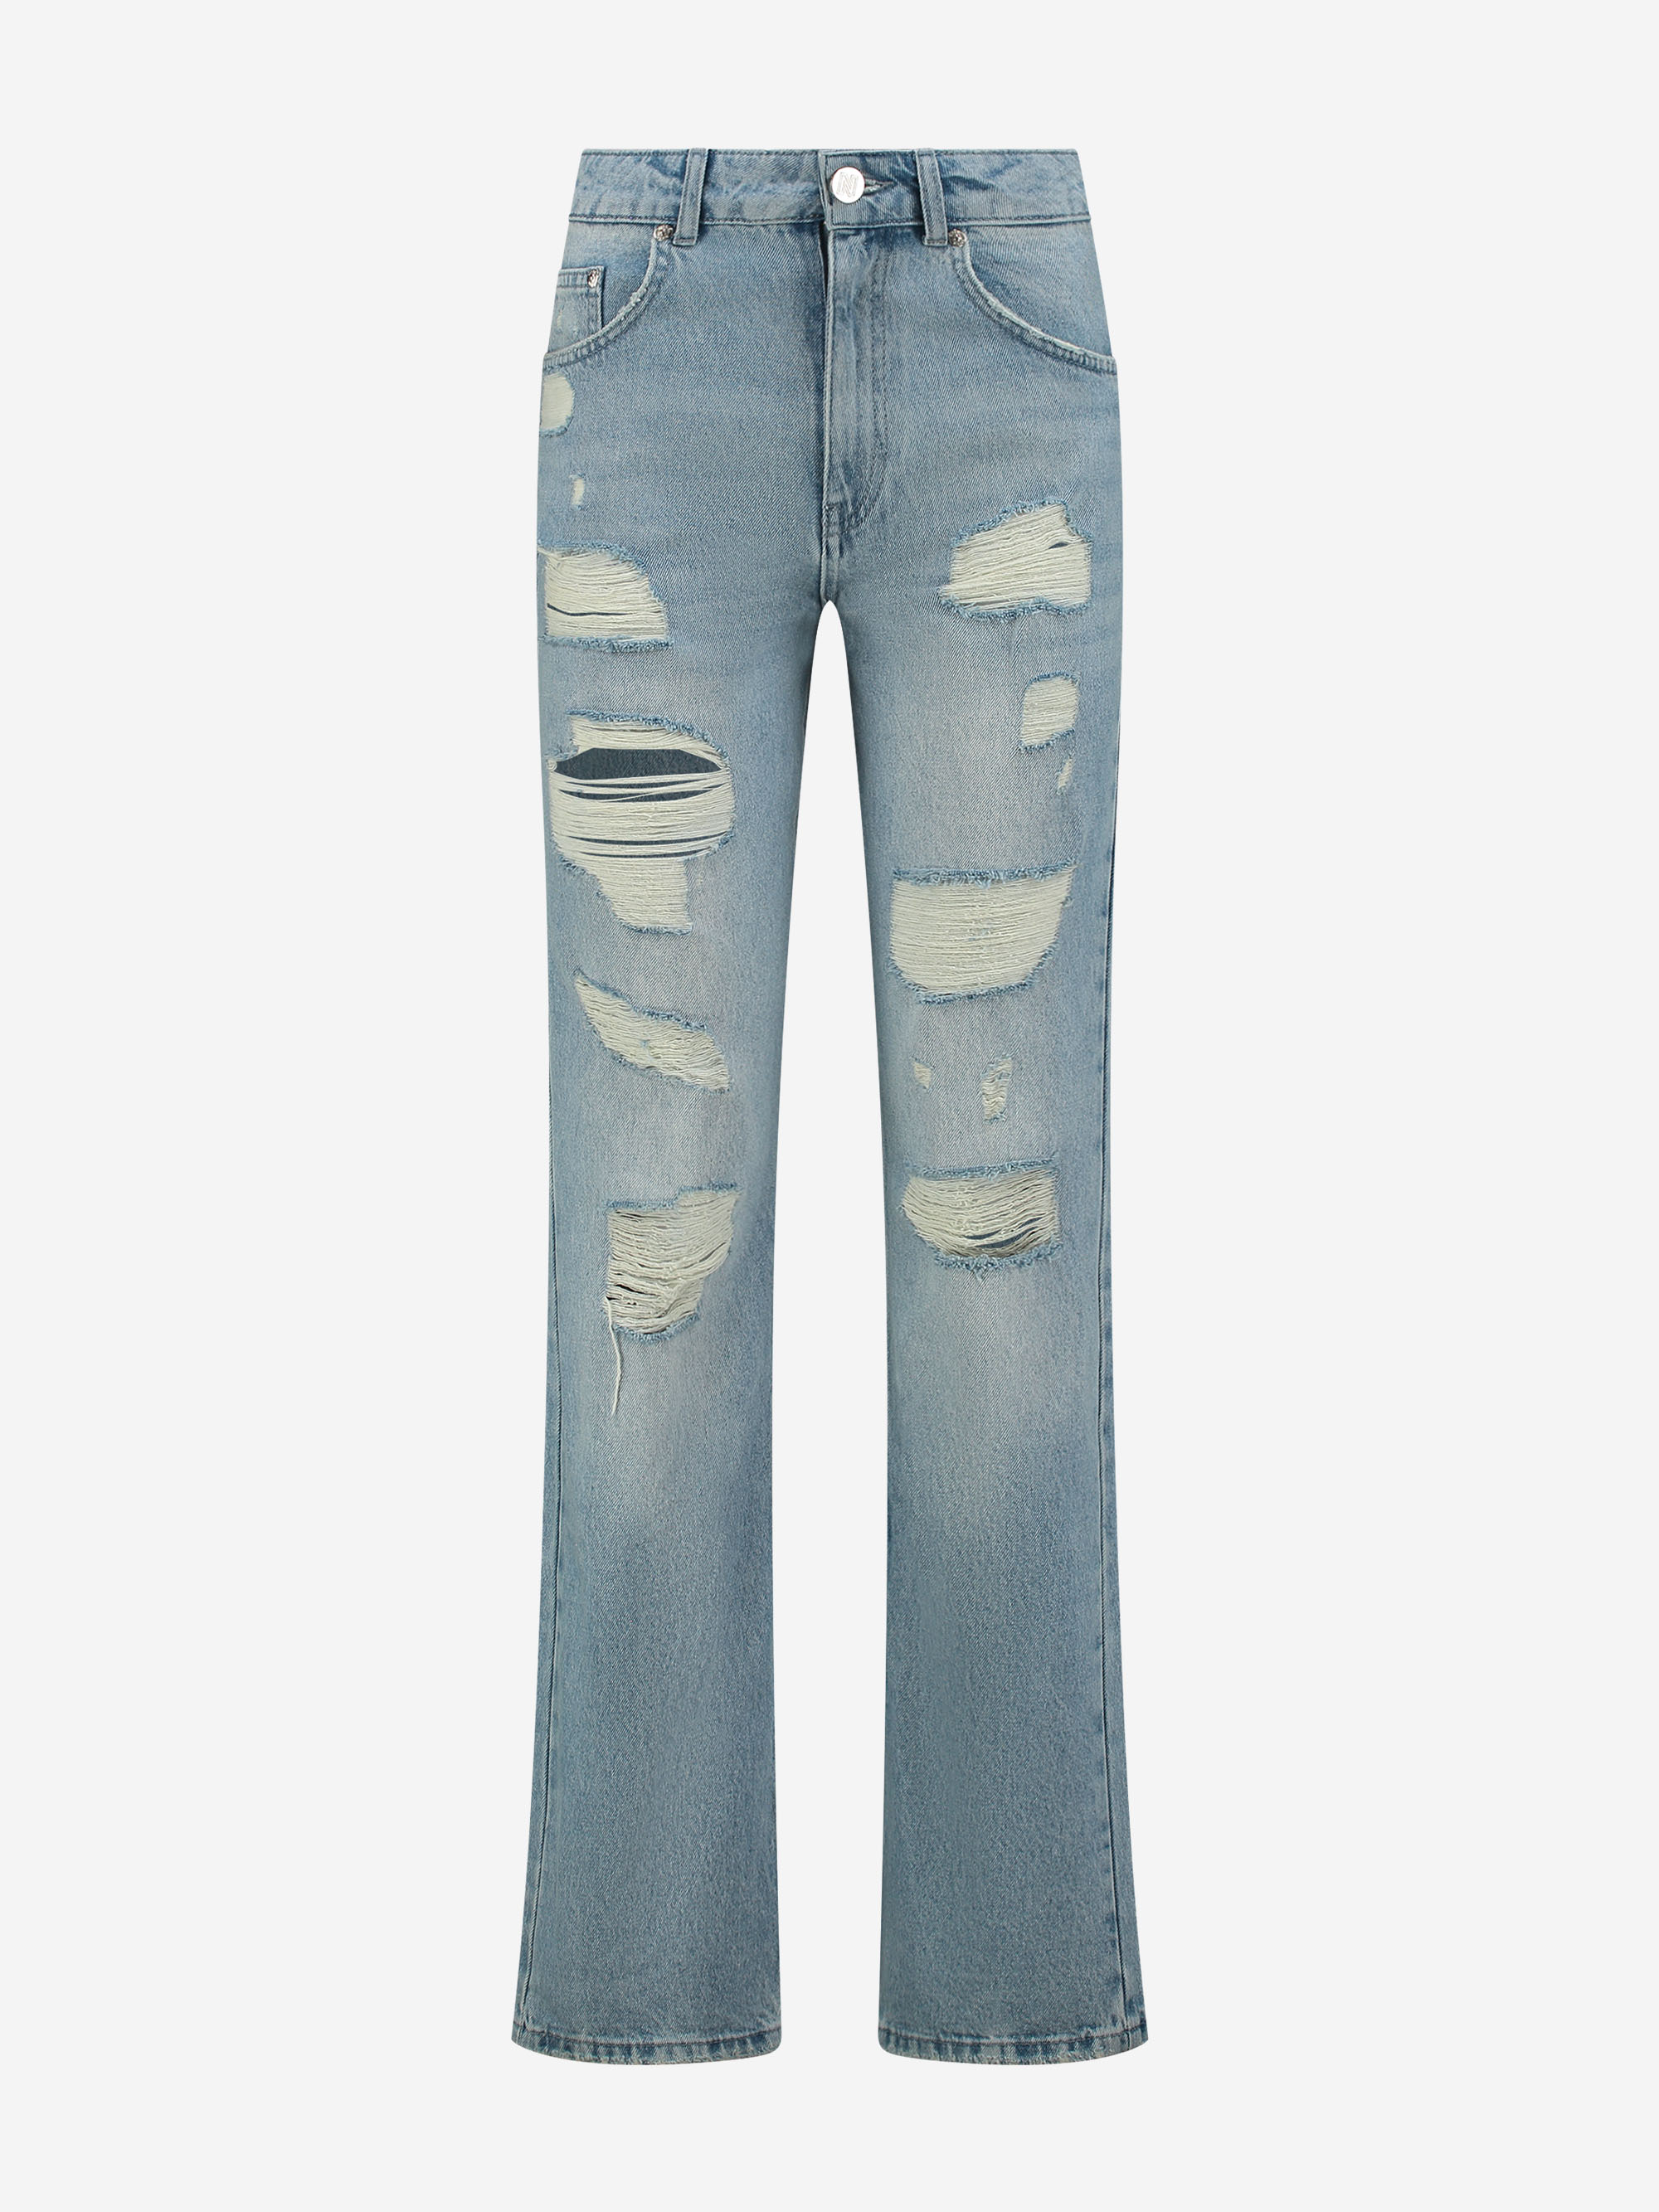 Wide leg destroyed jeans with high rise